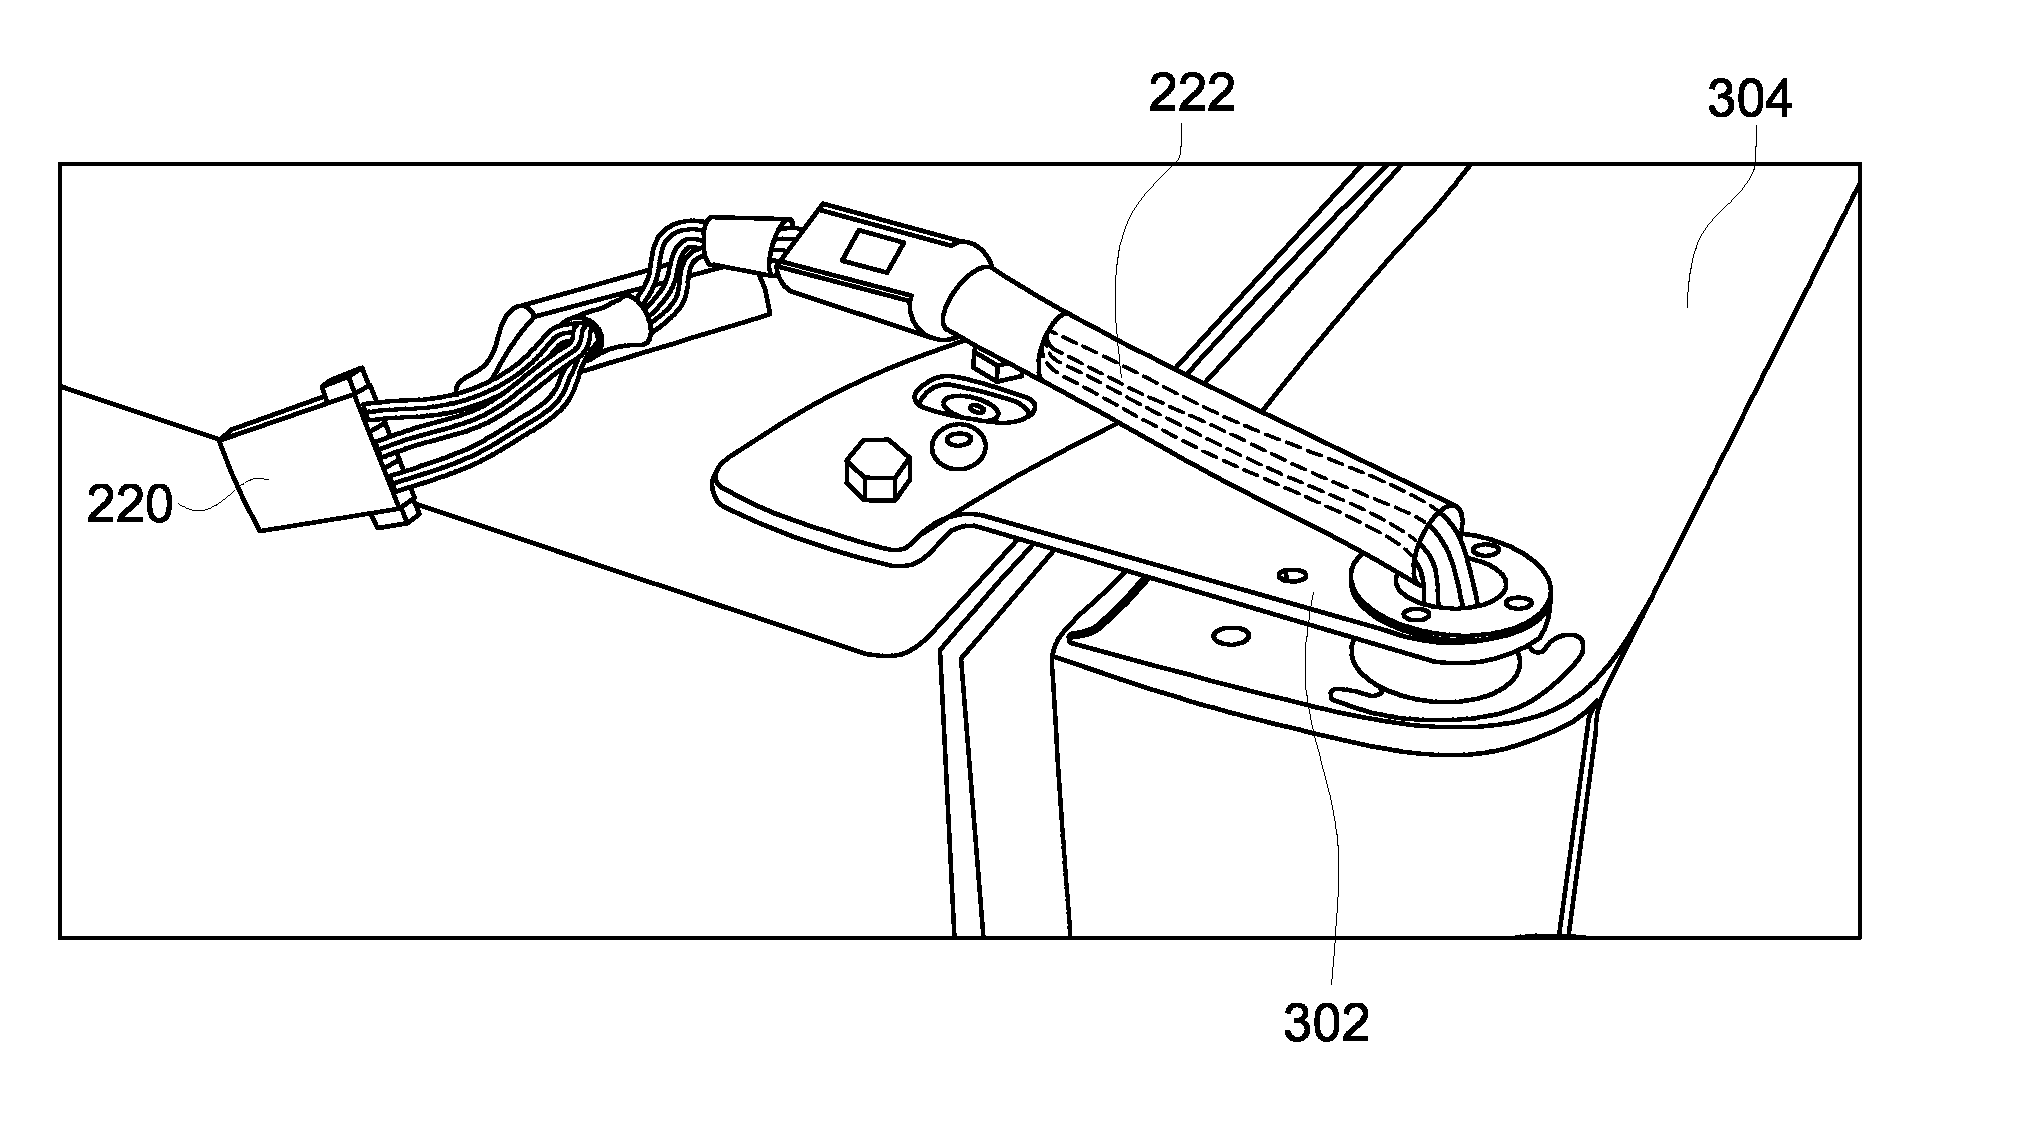 Connection point for communication device on appliance